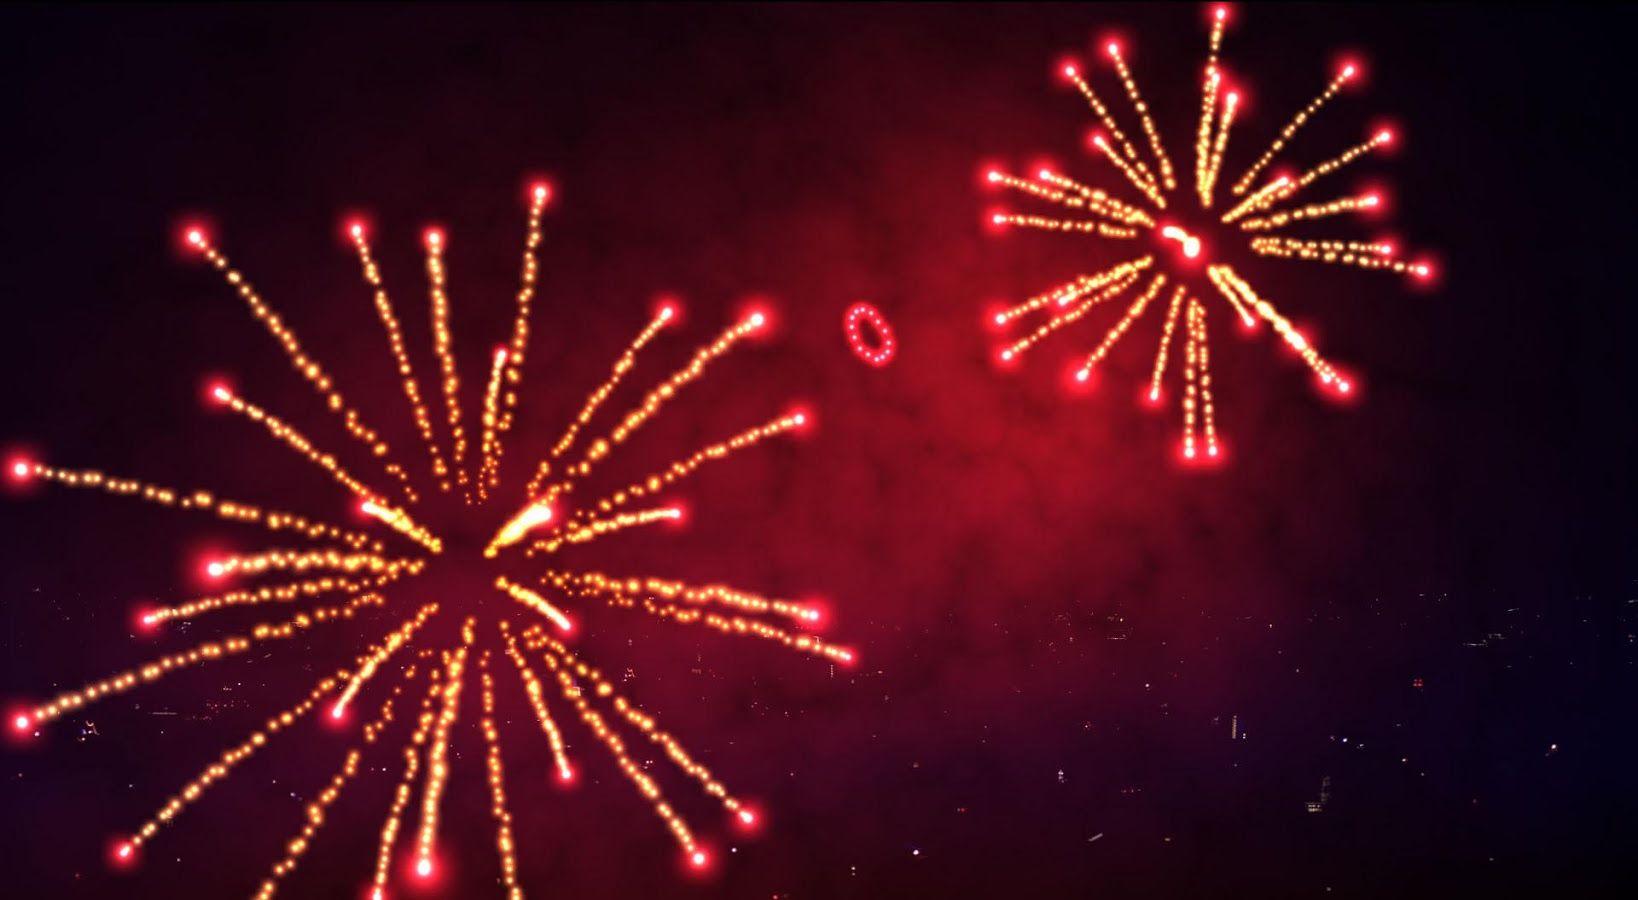 3D Fireworks Wallpaper Free Apps on Google Play